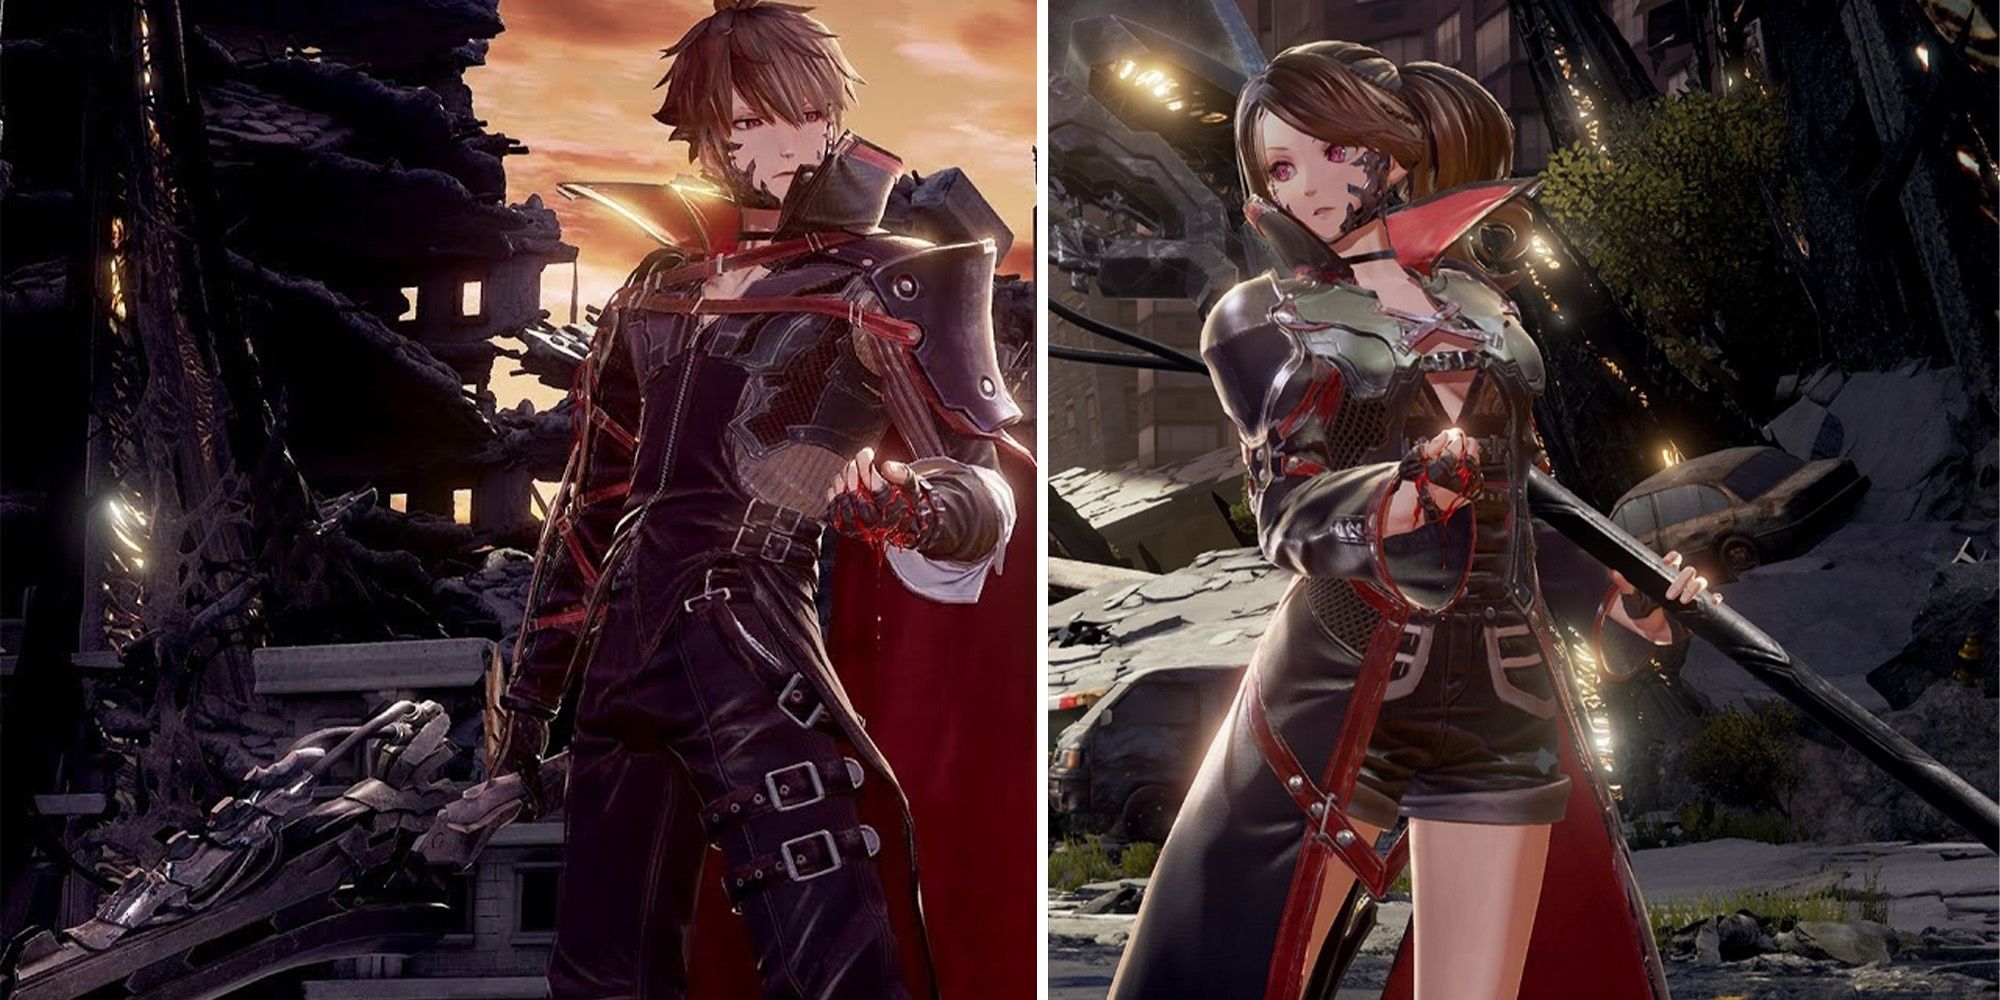 Code Vein Protagonist shown as male and female